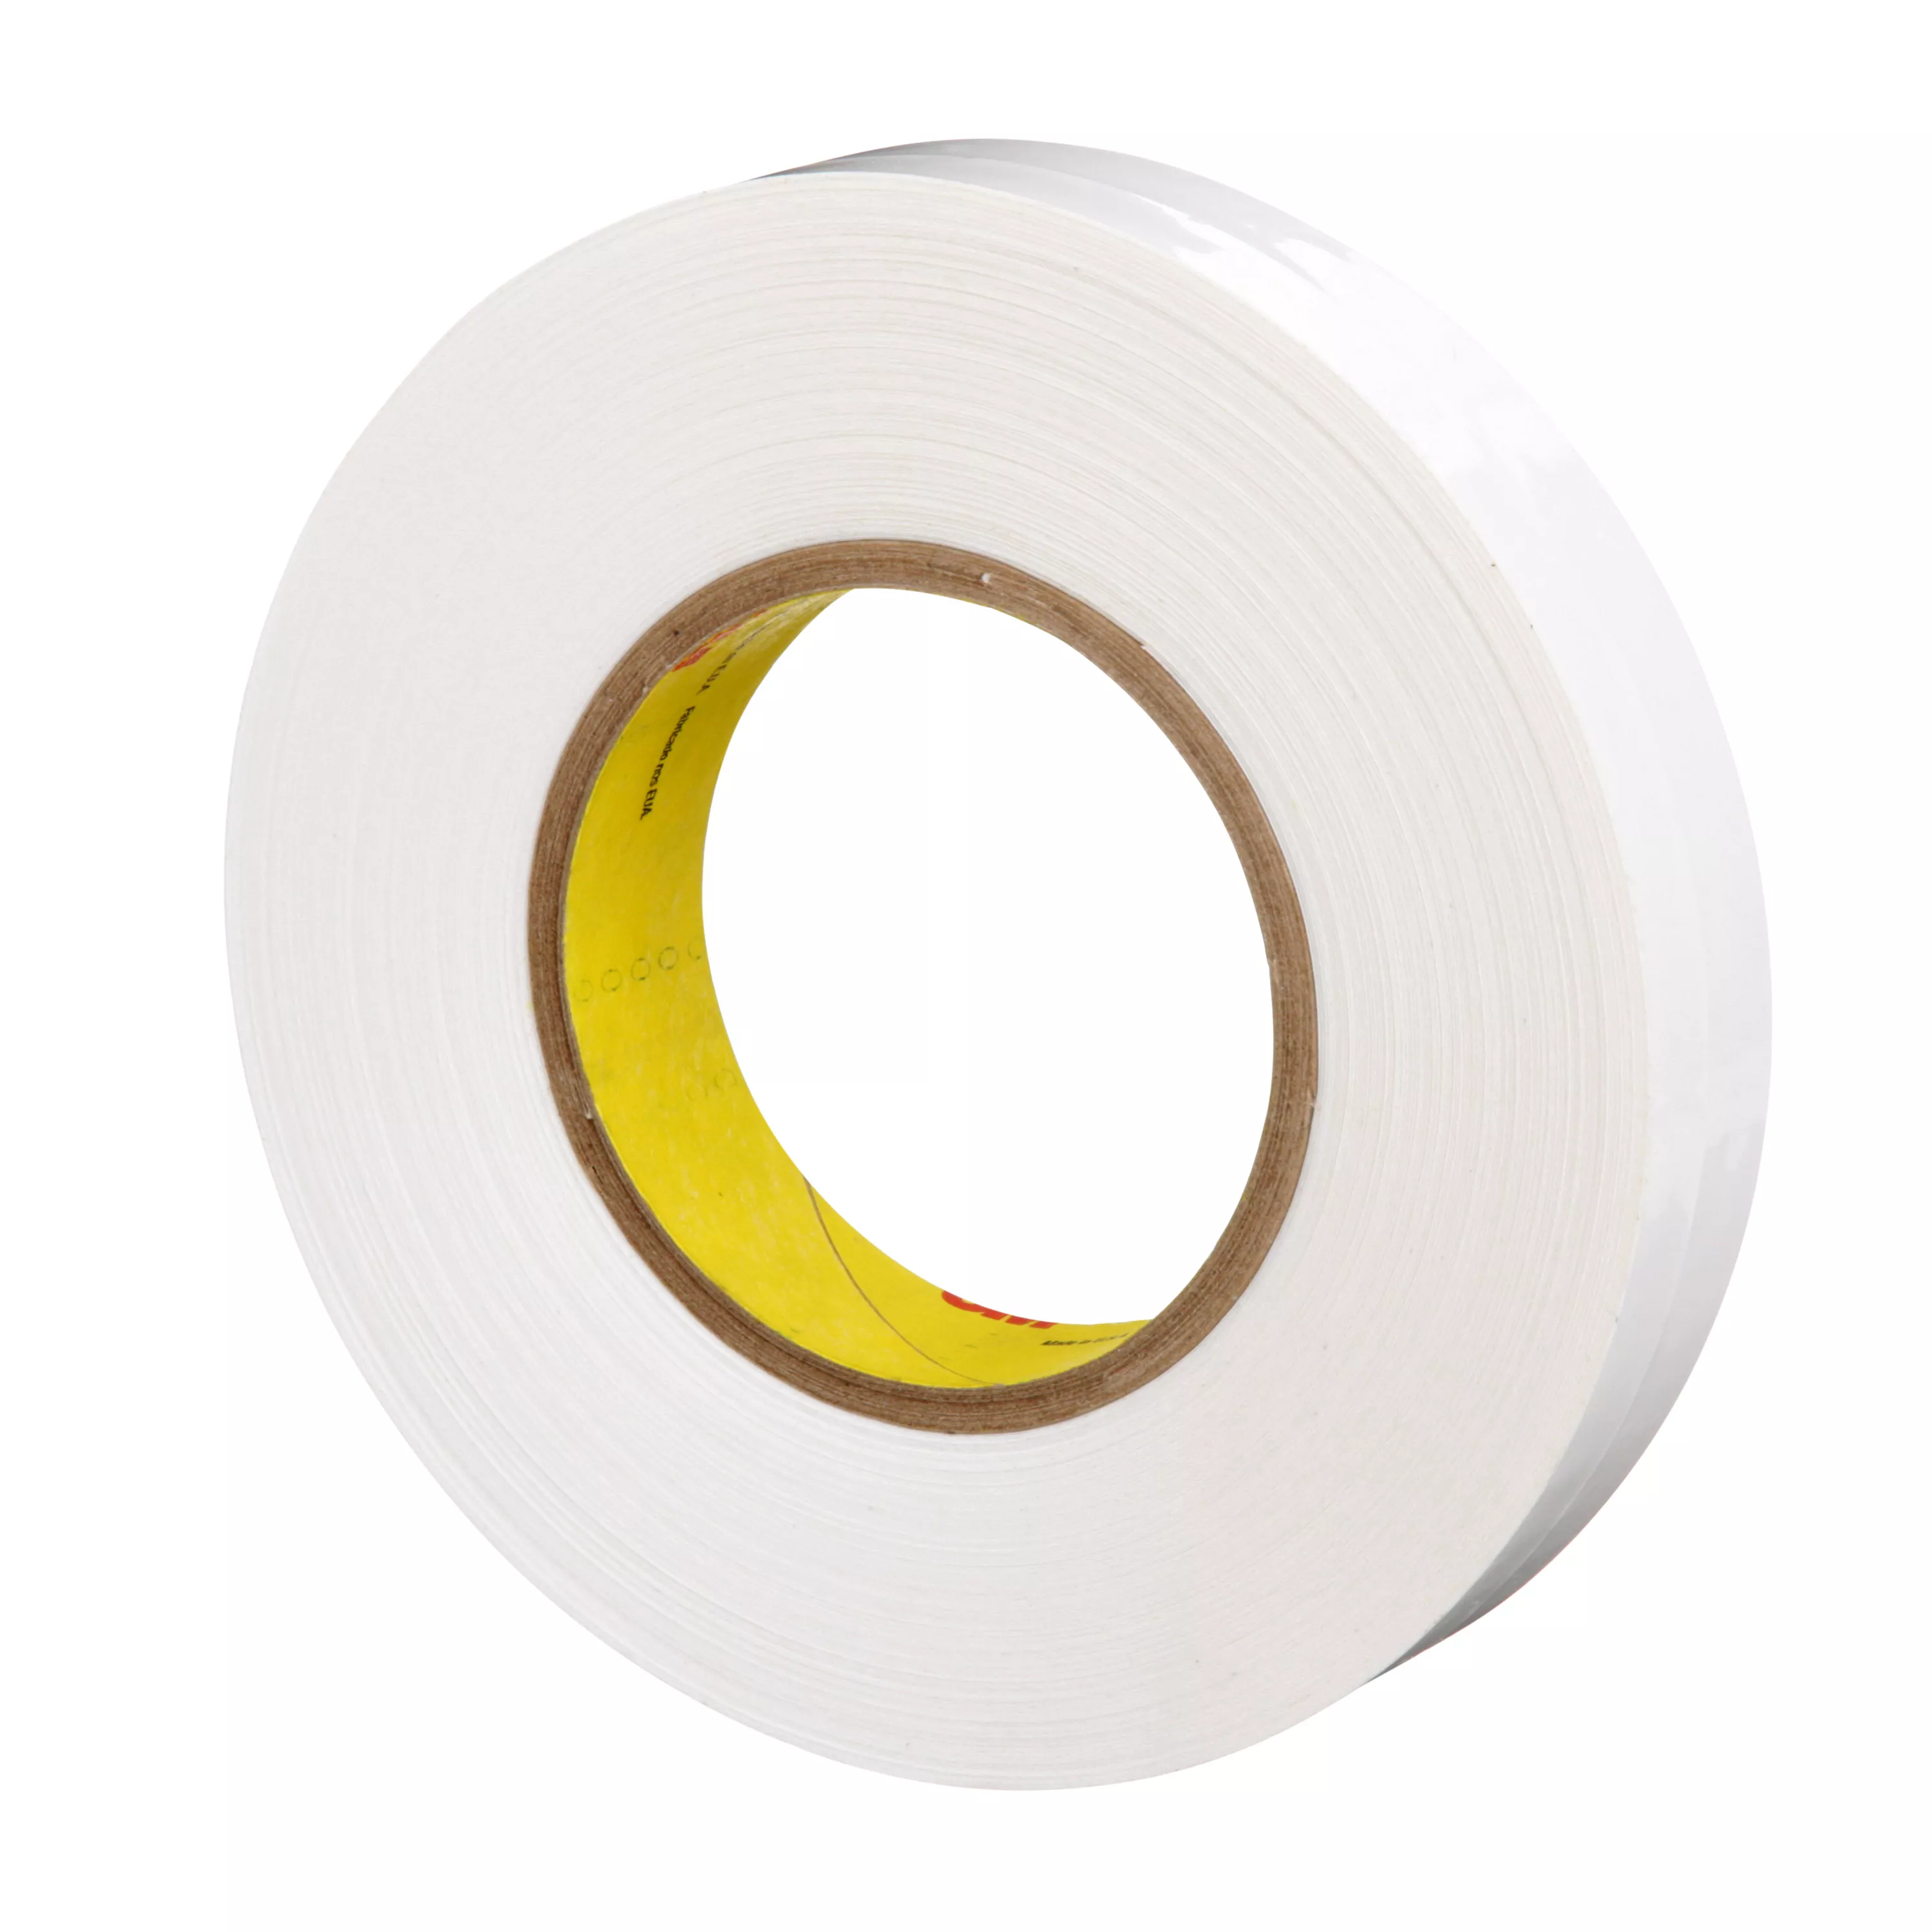 SKU 7000048460 | 3M™ Removable Repositionable Tape 666